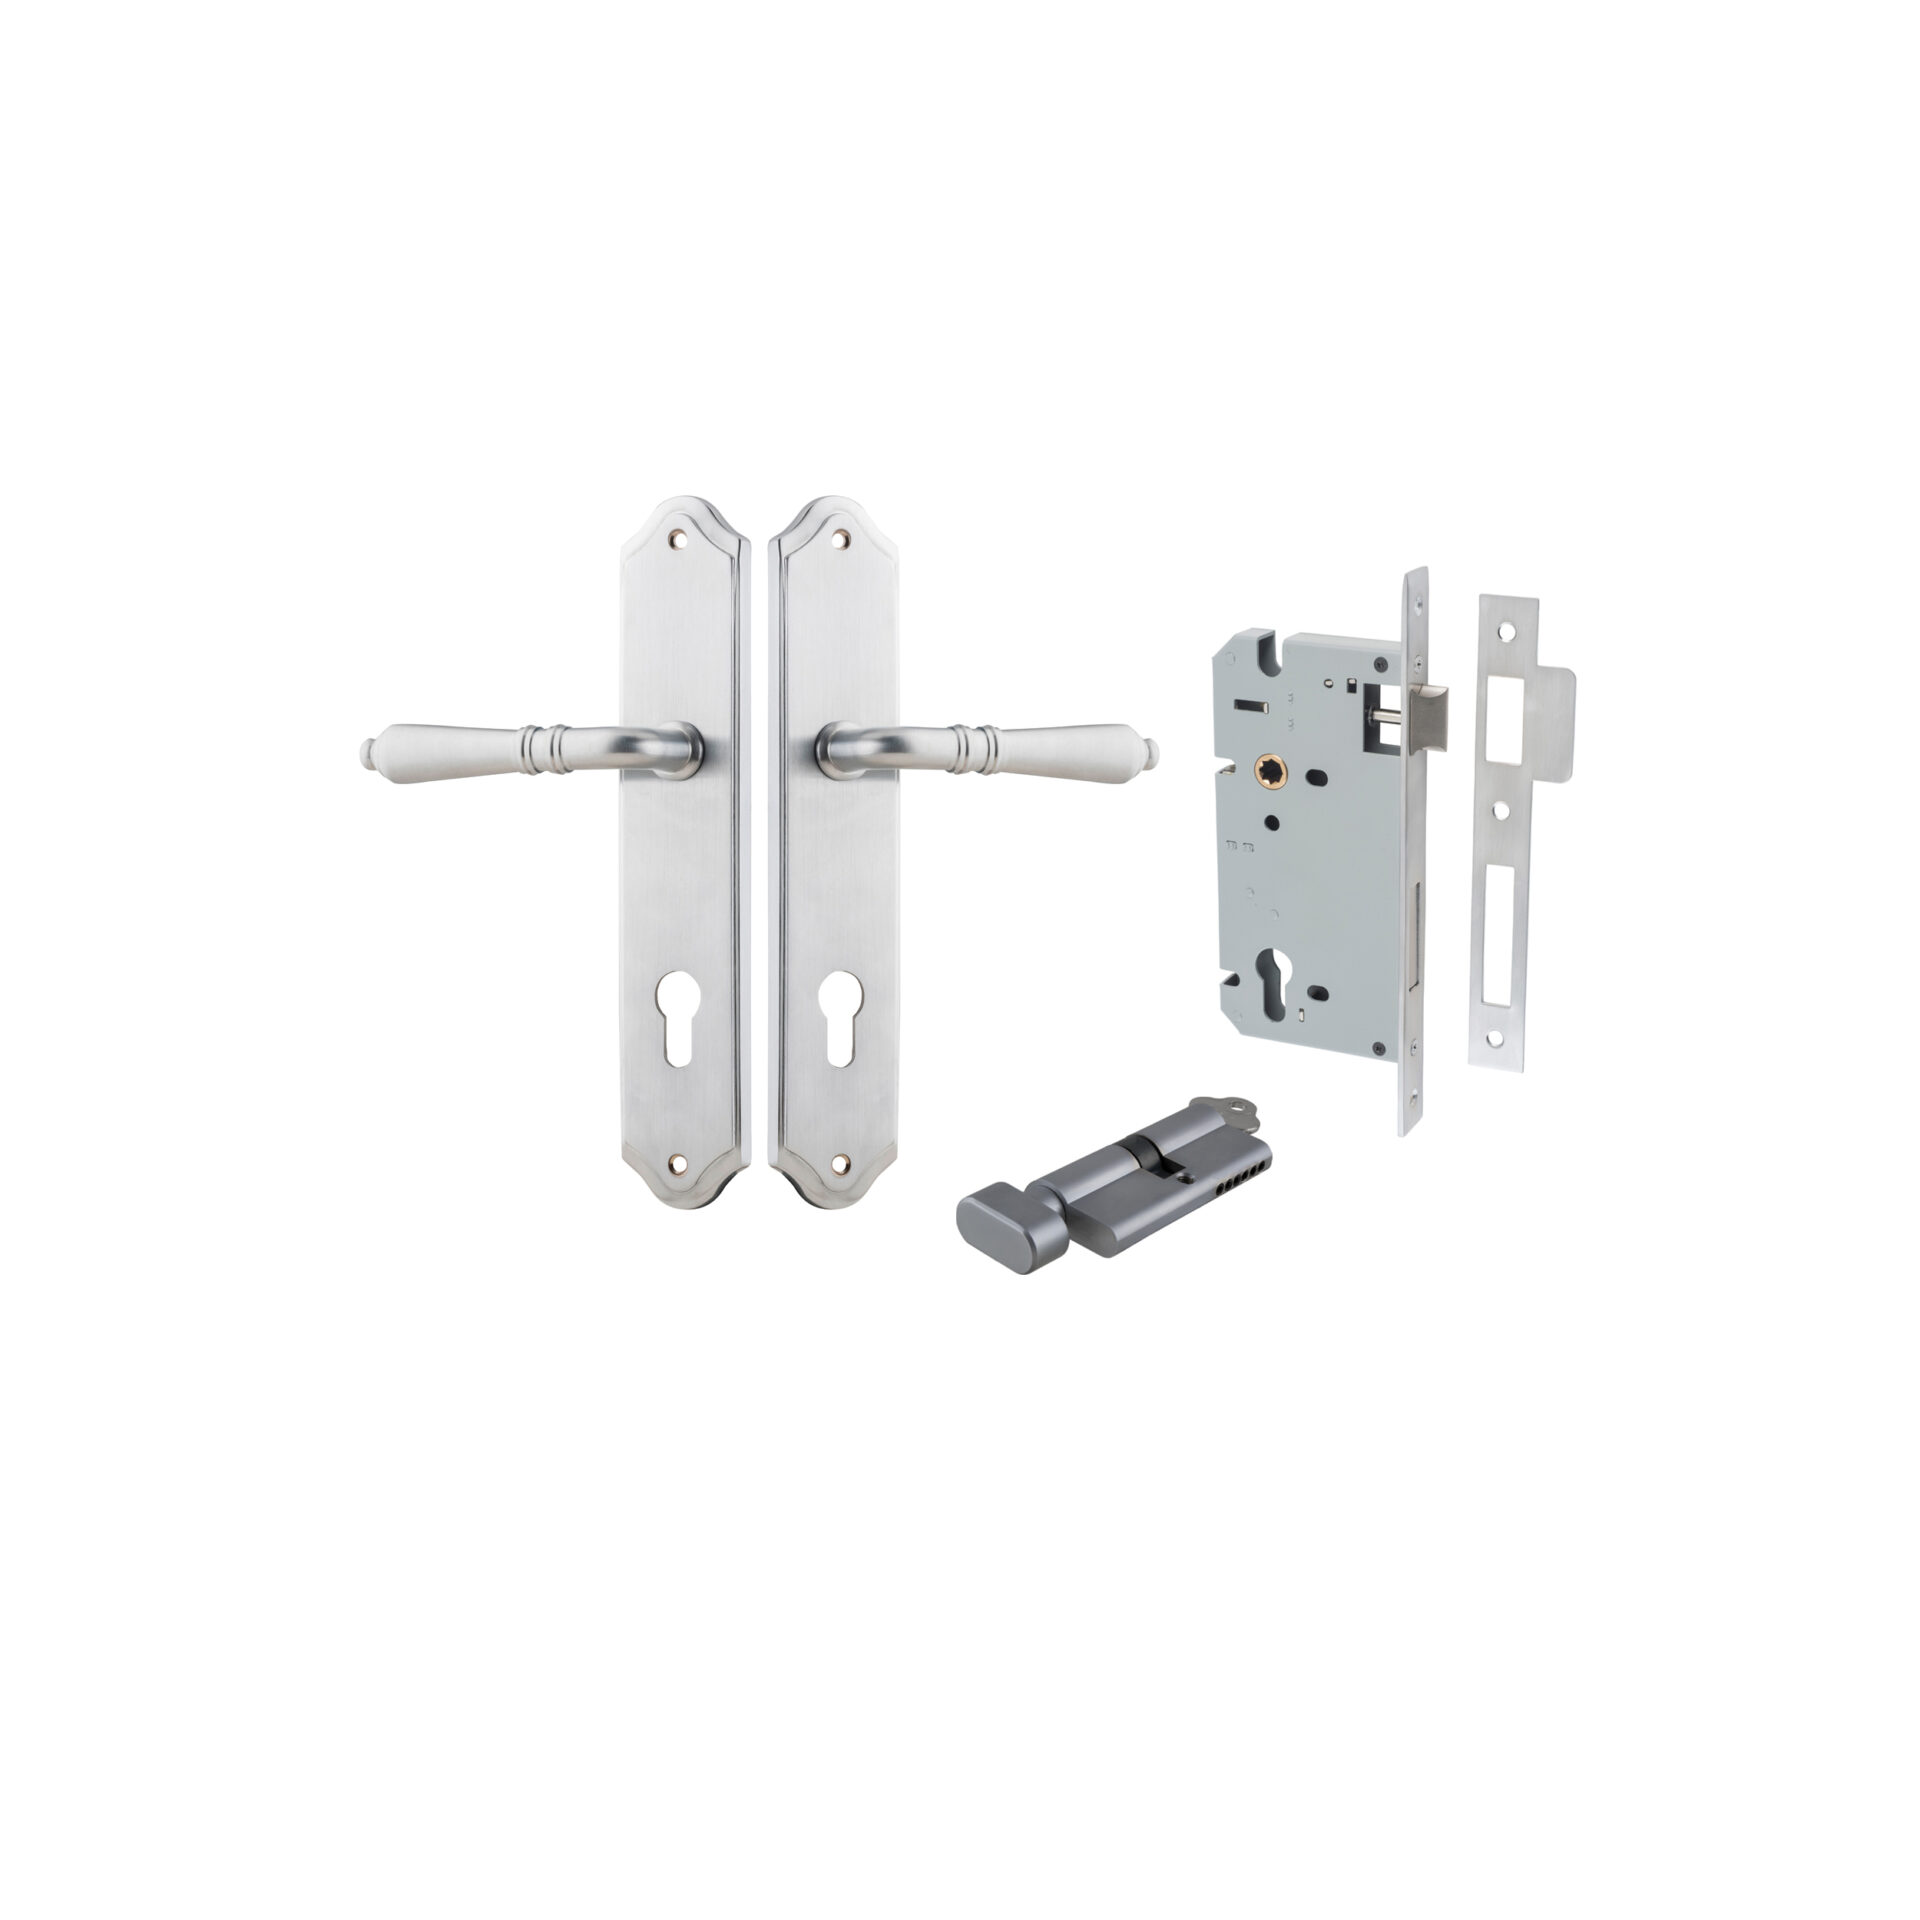 Sarlat Lever - Shouldered Backplate Entrance Kit with High Security Lock